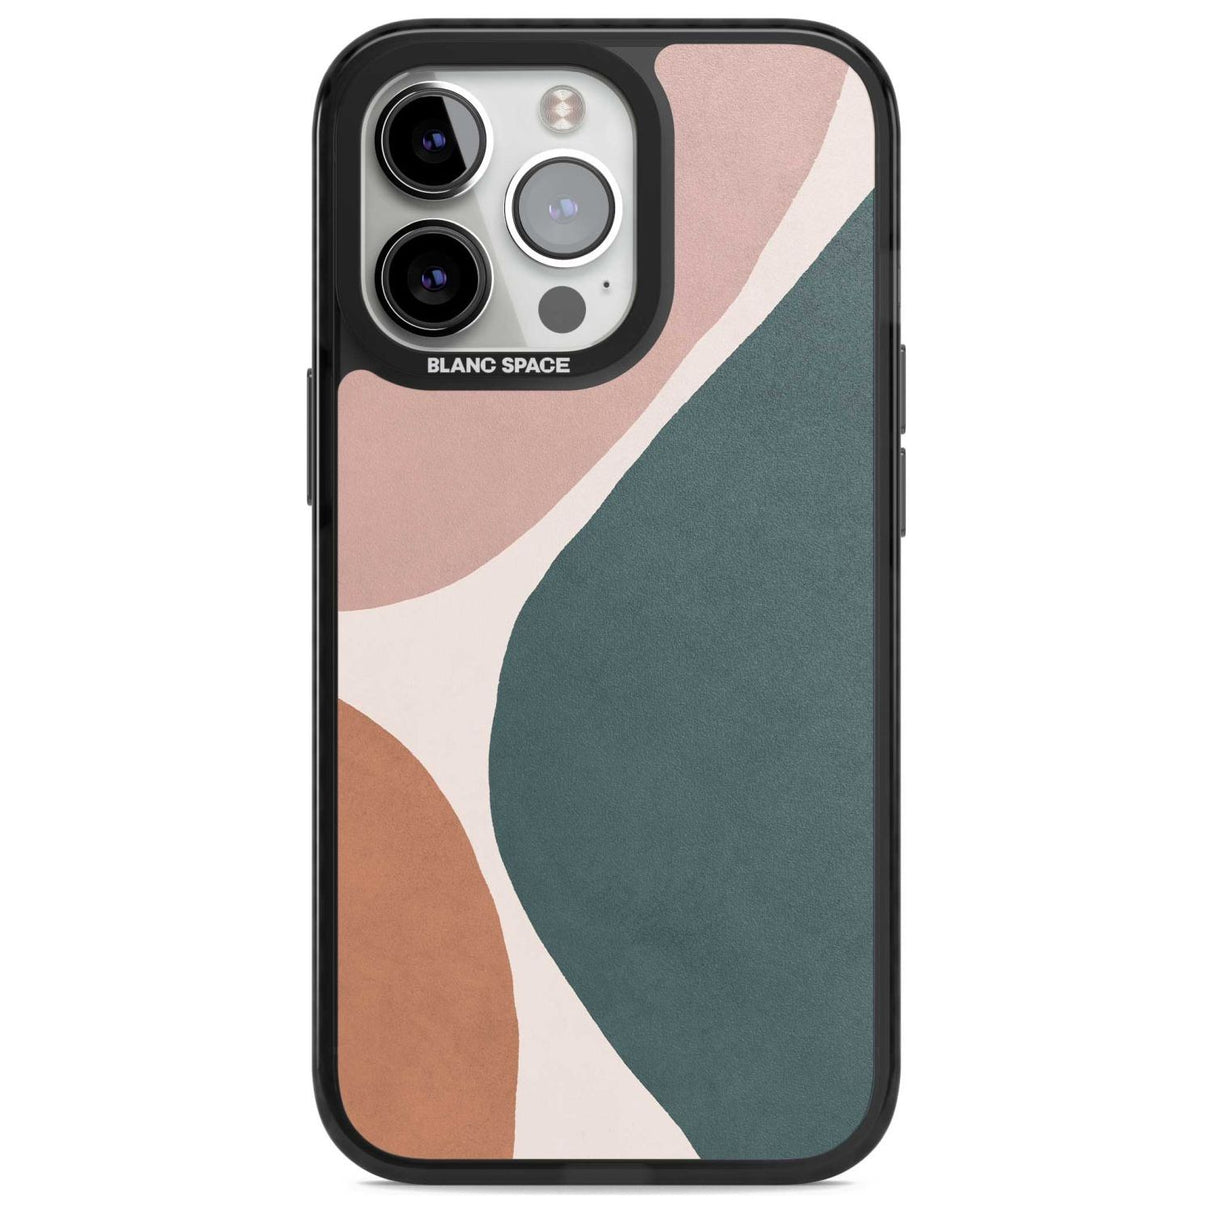 Lush Abstract Watercolour Design #8 Phone Case iPhone 15 Pro / Magsafe Black Impact Case,iPhone 15 Pro Max / Magsafe Black Impact Case,iPhone 14 Pro Max / Magsafe Black Impact Case,iPhone 13 Pro / Magsafe Black Impact Case,iPhone 14 Pro / Magsafe Black Impact Case Blanc Space